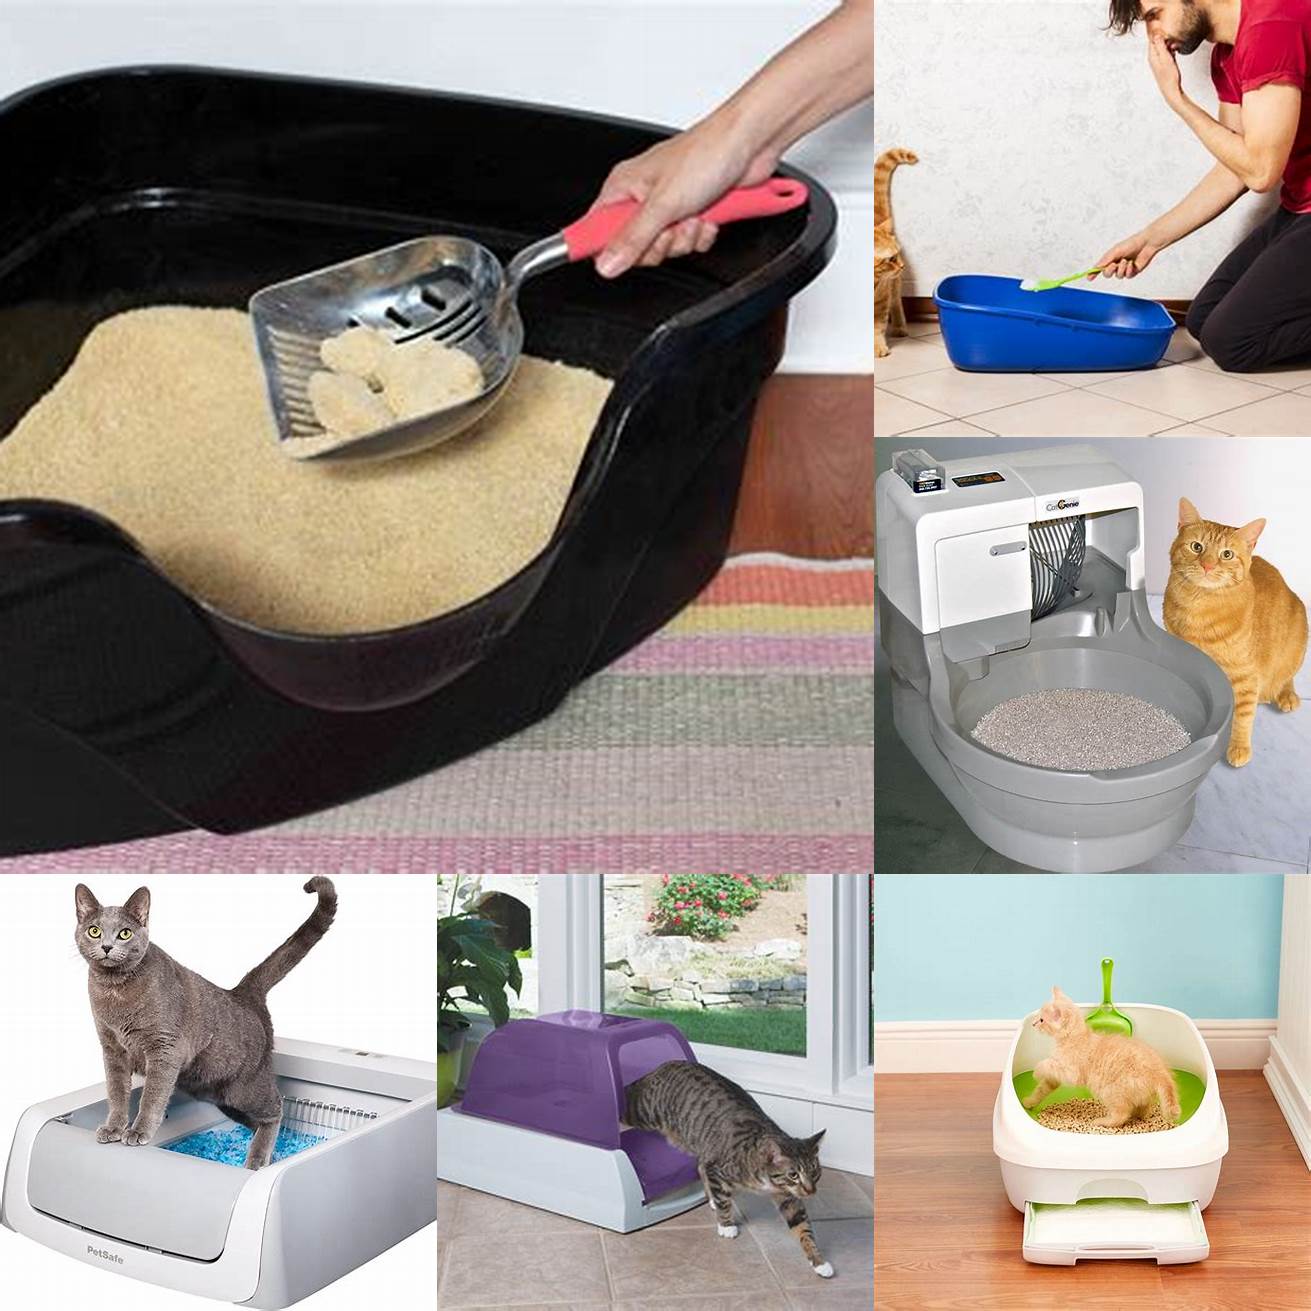 Makes cleaning the litter box easier